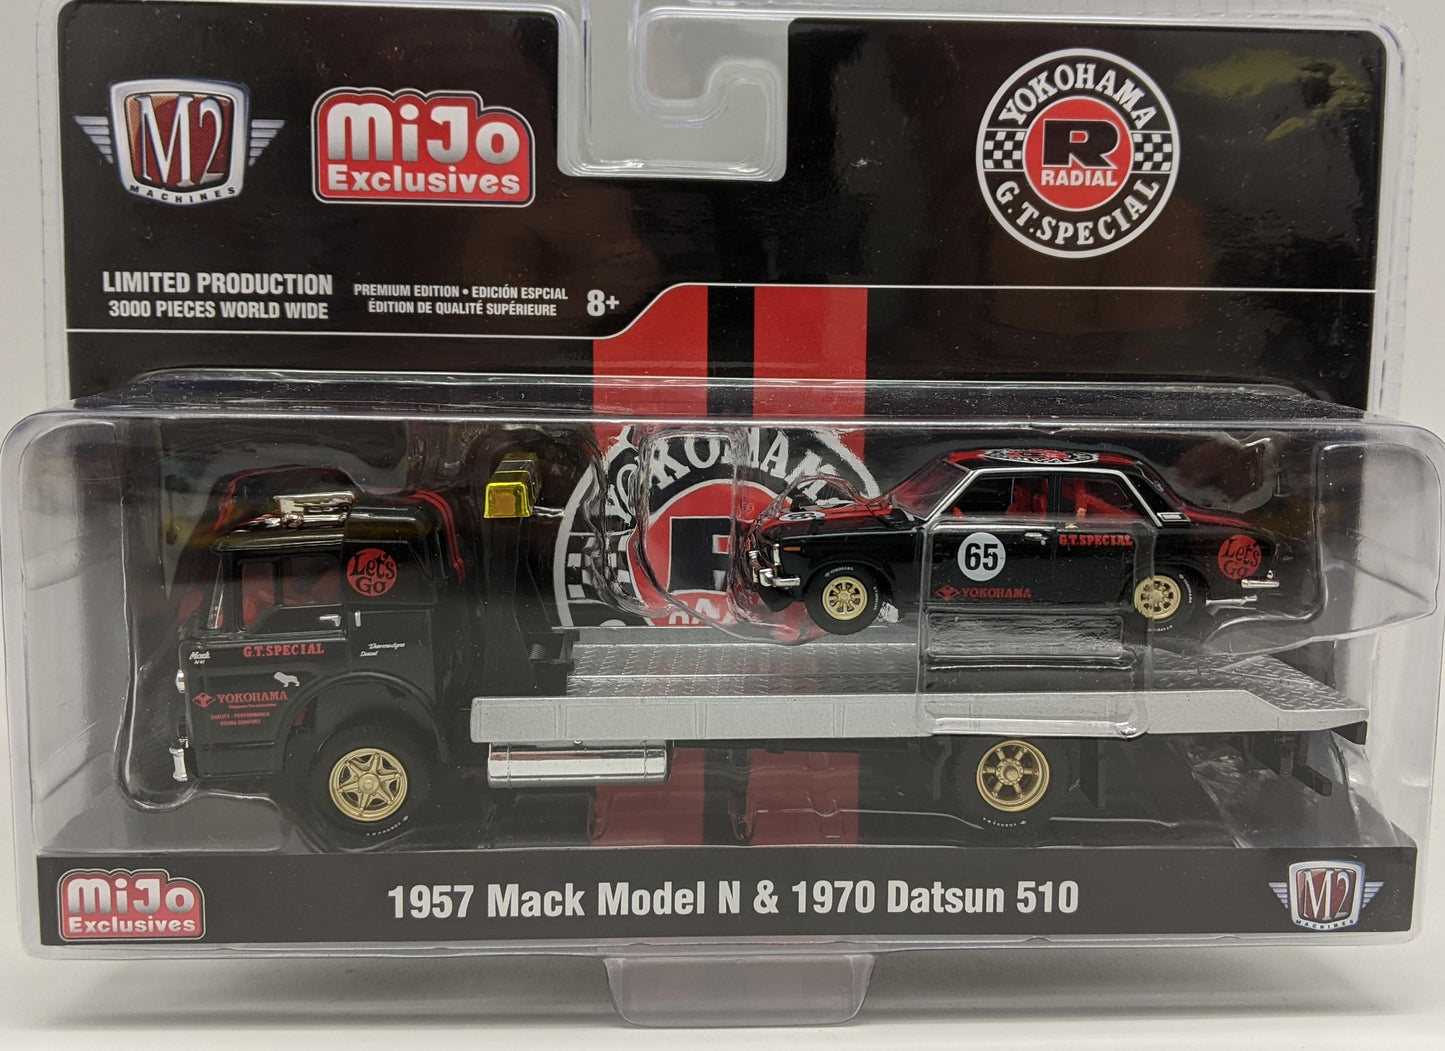 M2 1970 Datsun 510 on a 1957 Mack Tow Truck - MiJo Exclusive